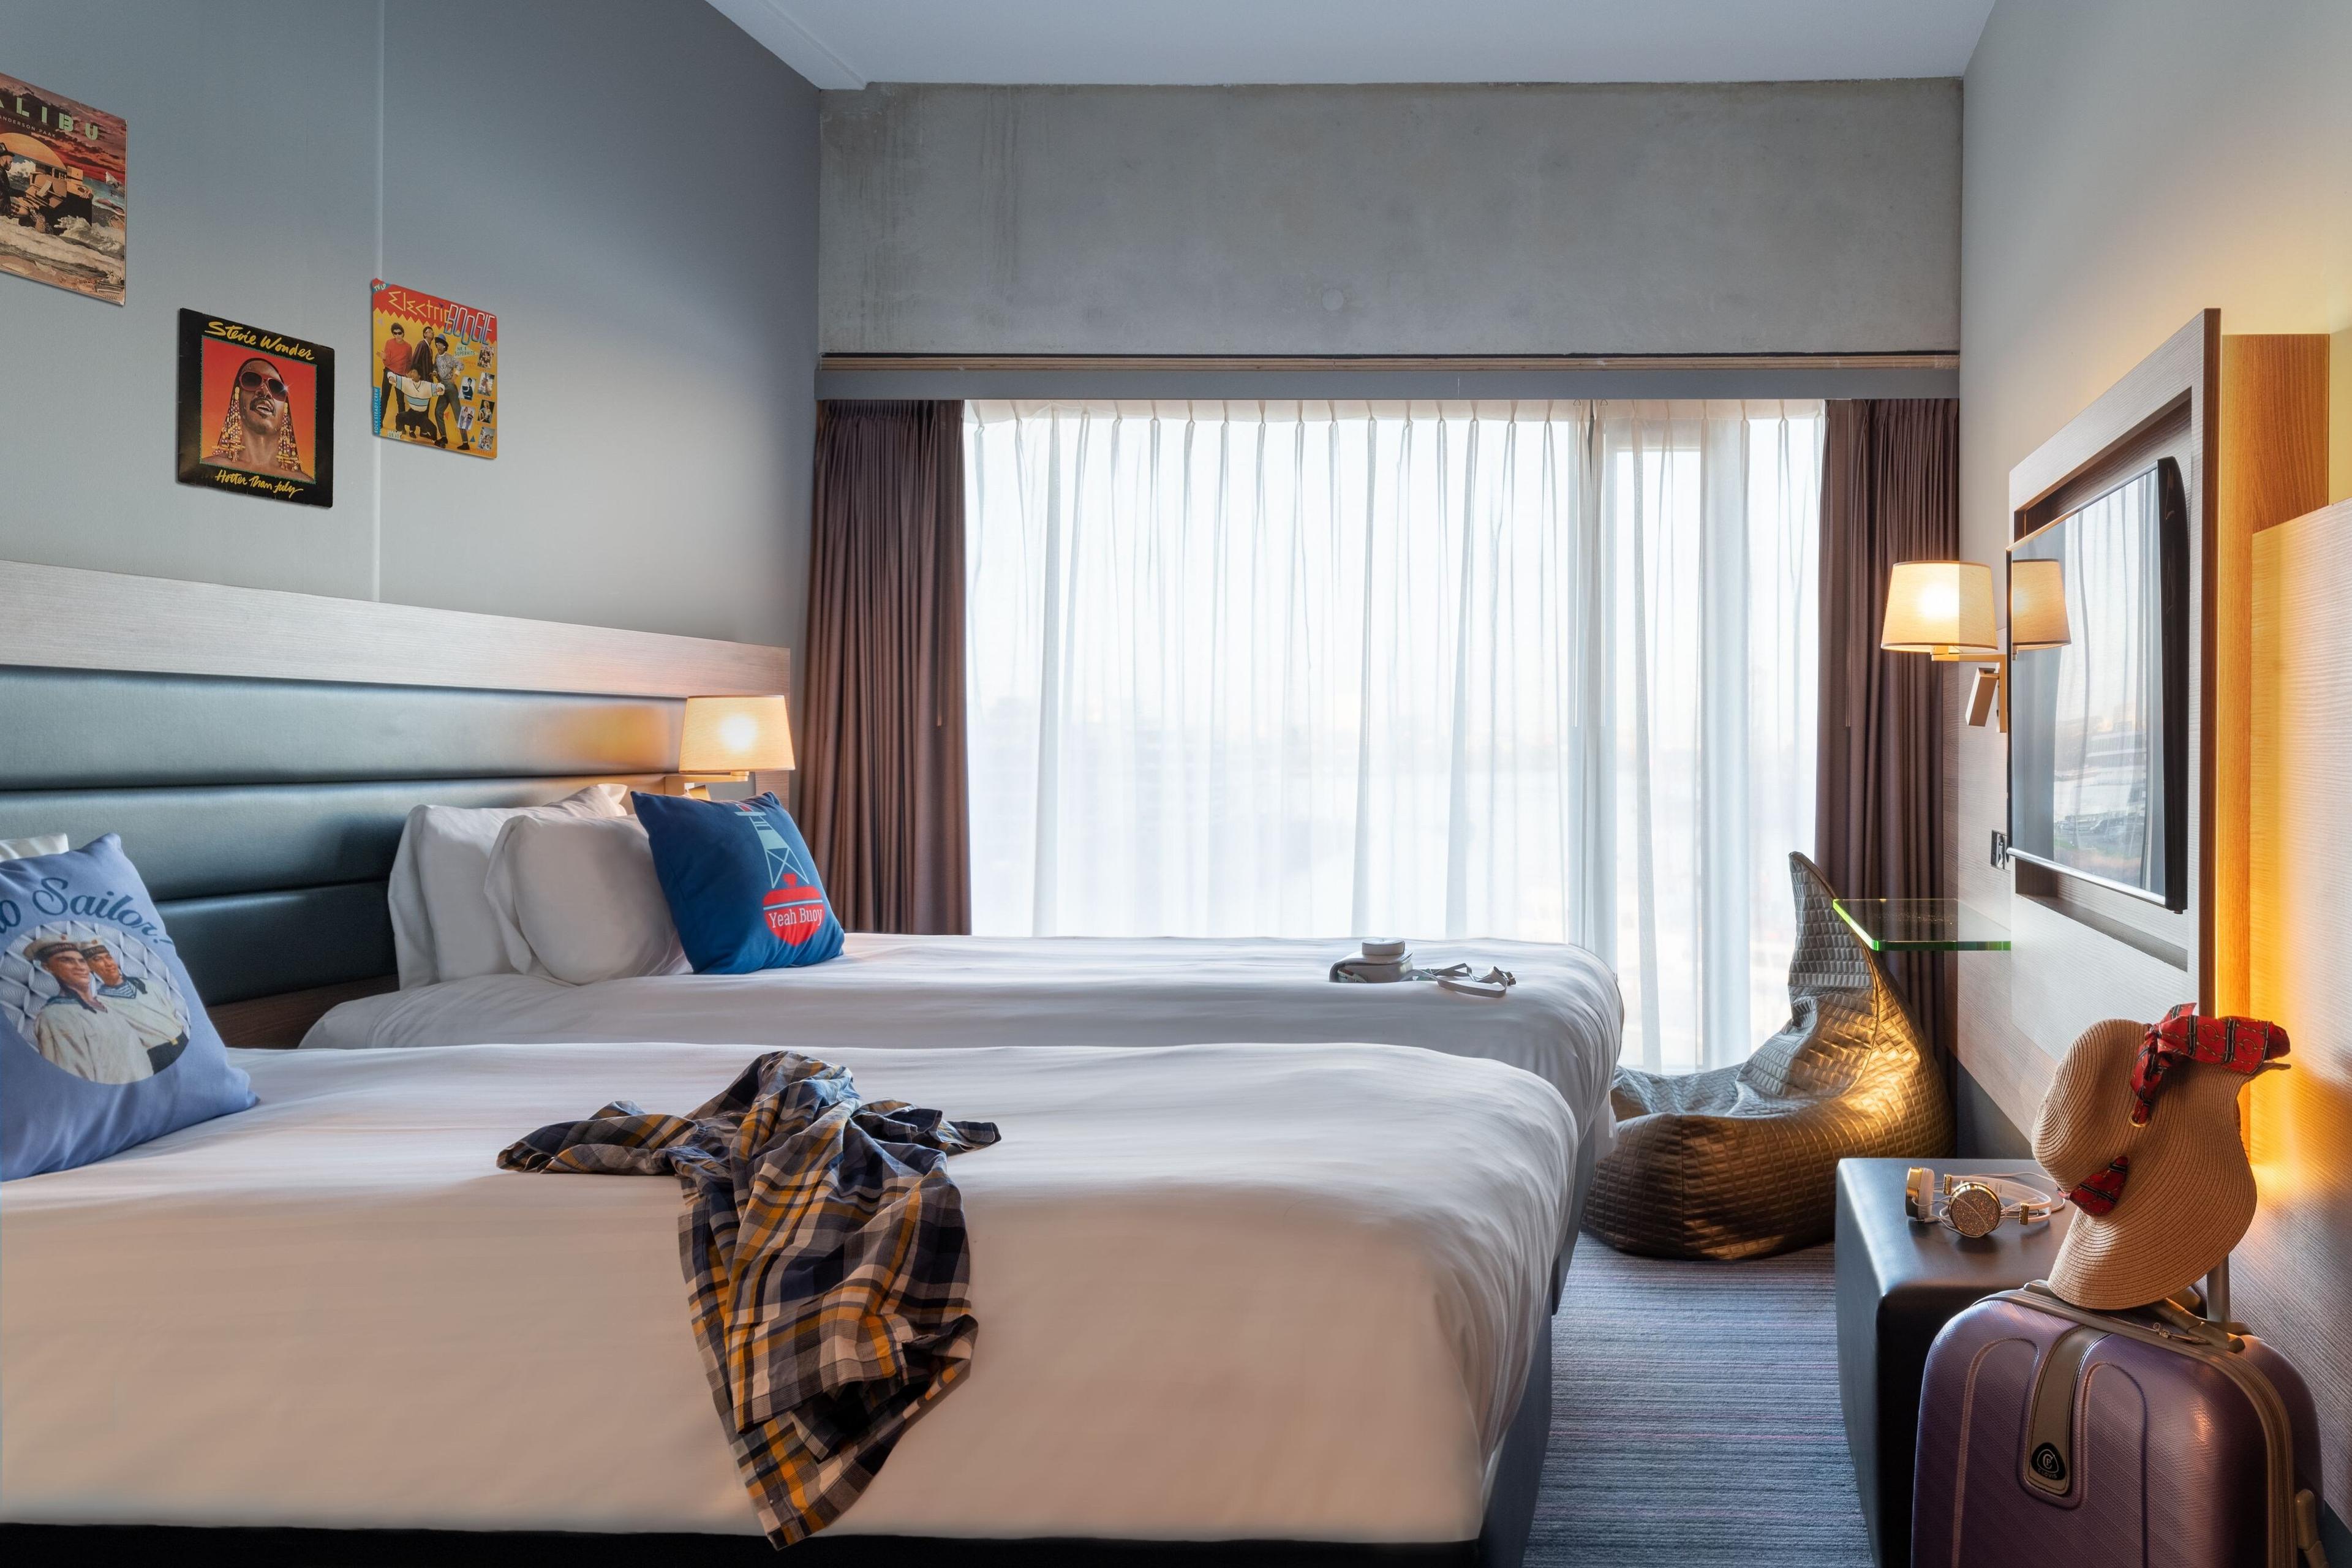 Our industrial-chic Moxy Sleeper Twin rooms are perfect for comfortable sharing thanks to two separate beds.